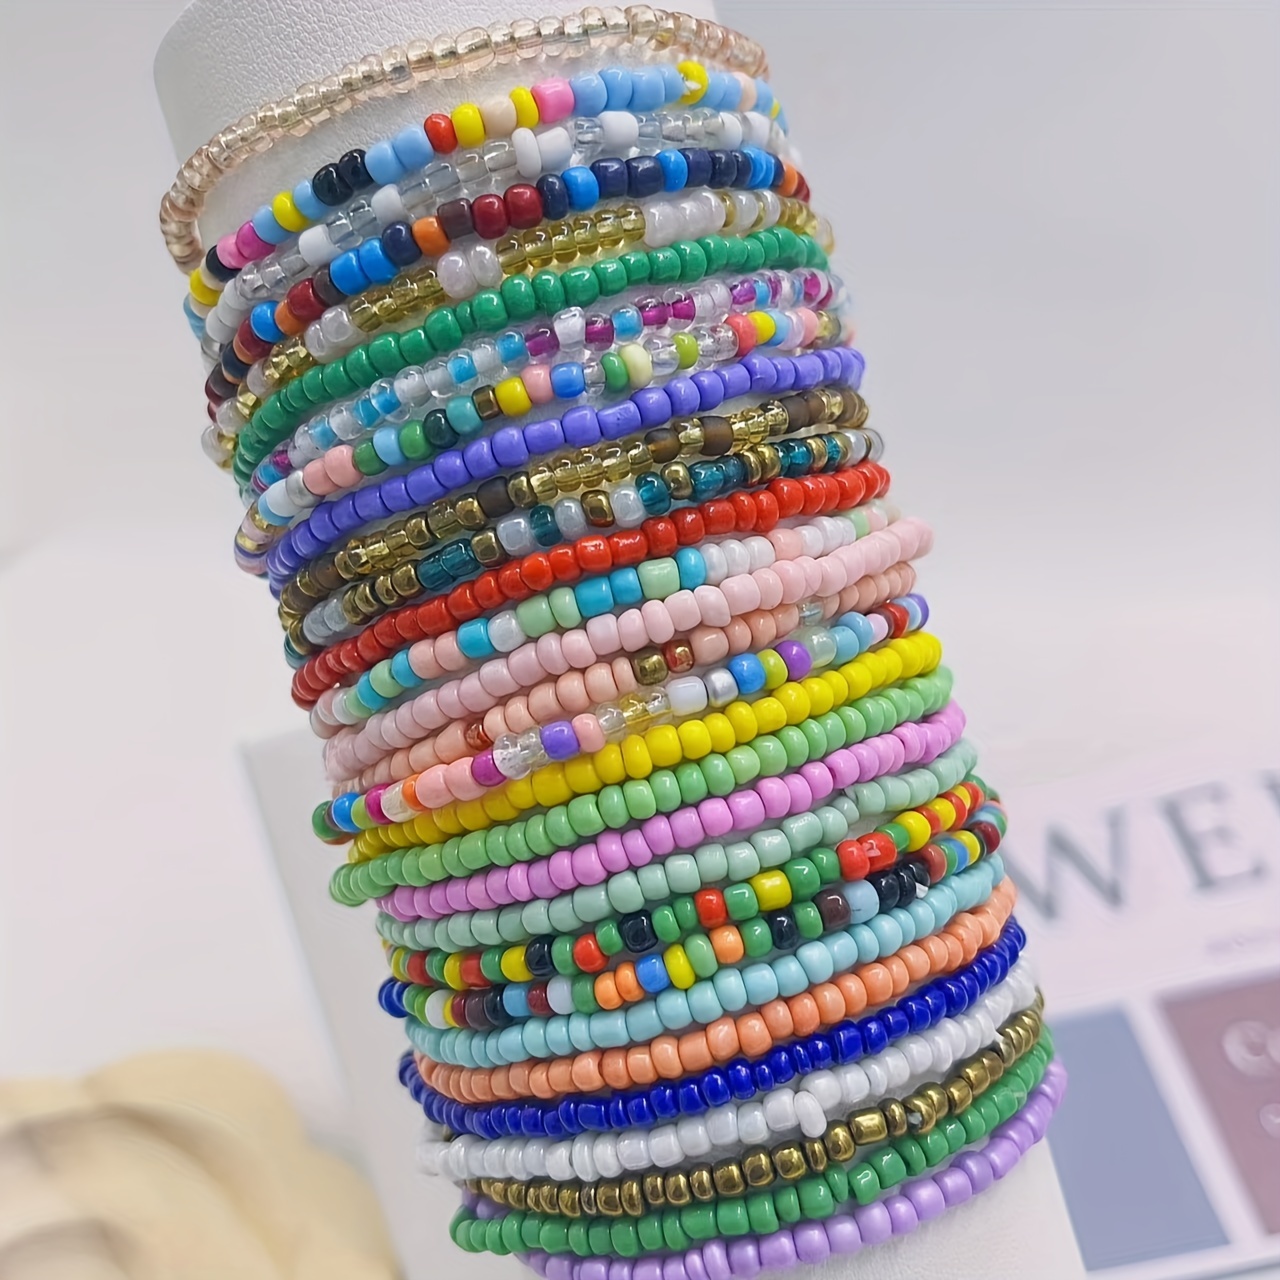 

10pc Colorful Mini Seed Beads Beaded Bracelet Set Boho Style Stackable Hand String Jewelry Set